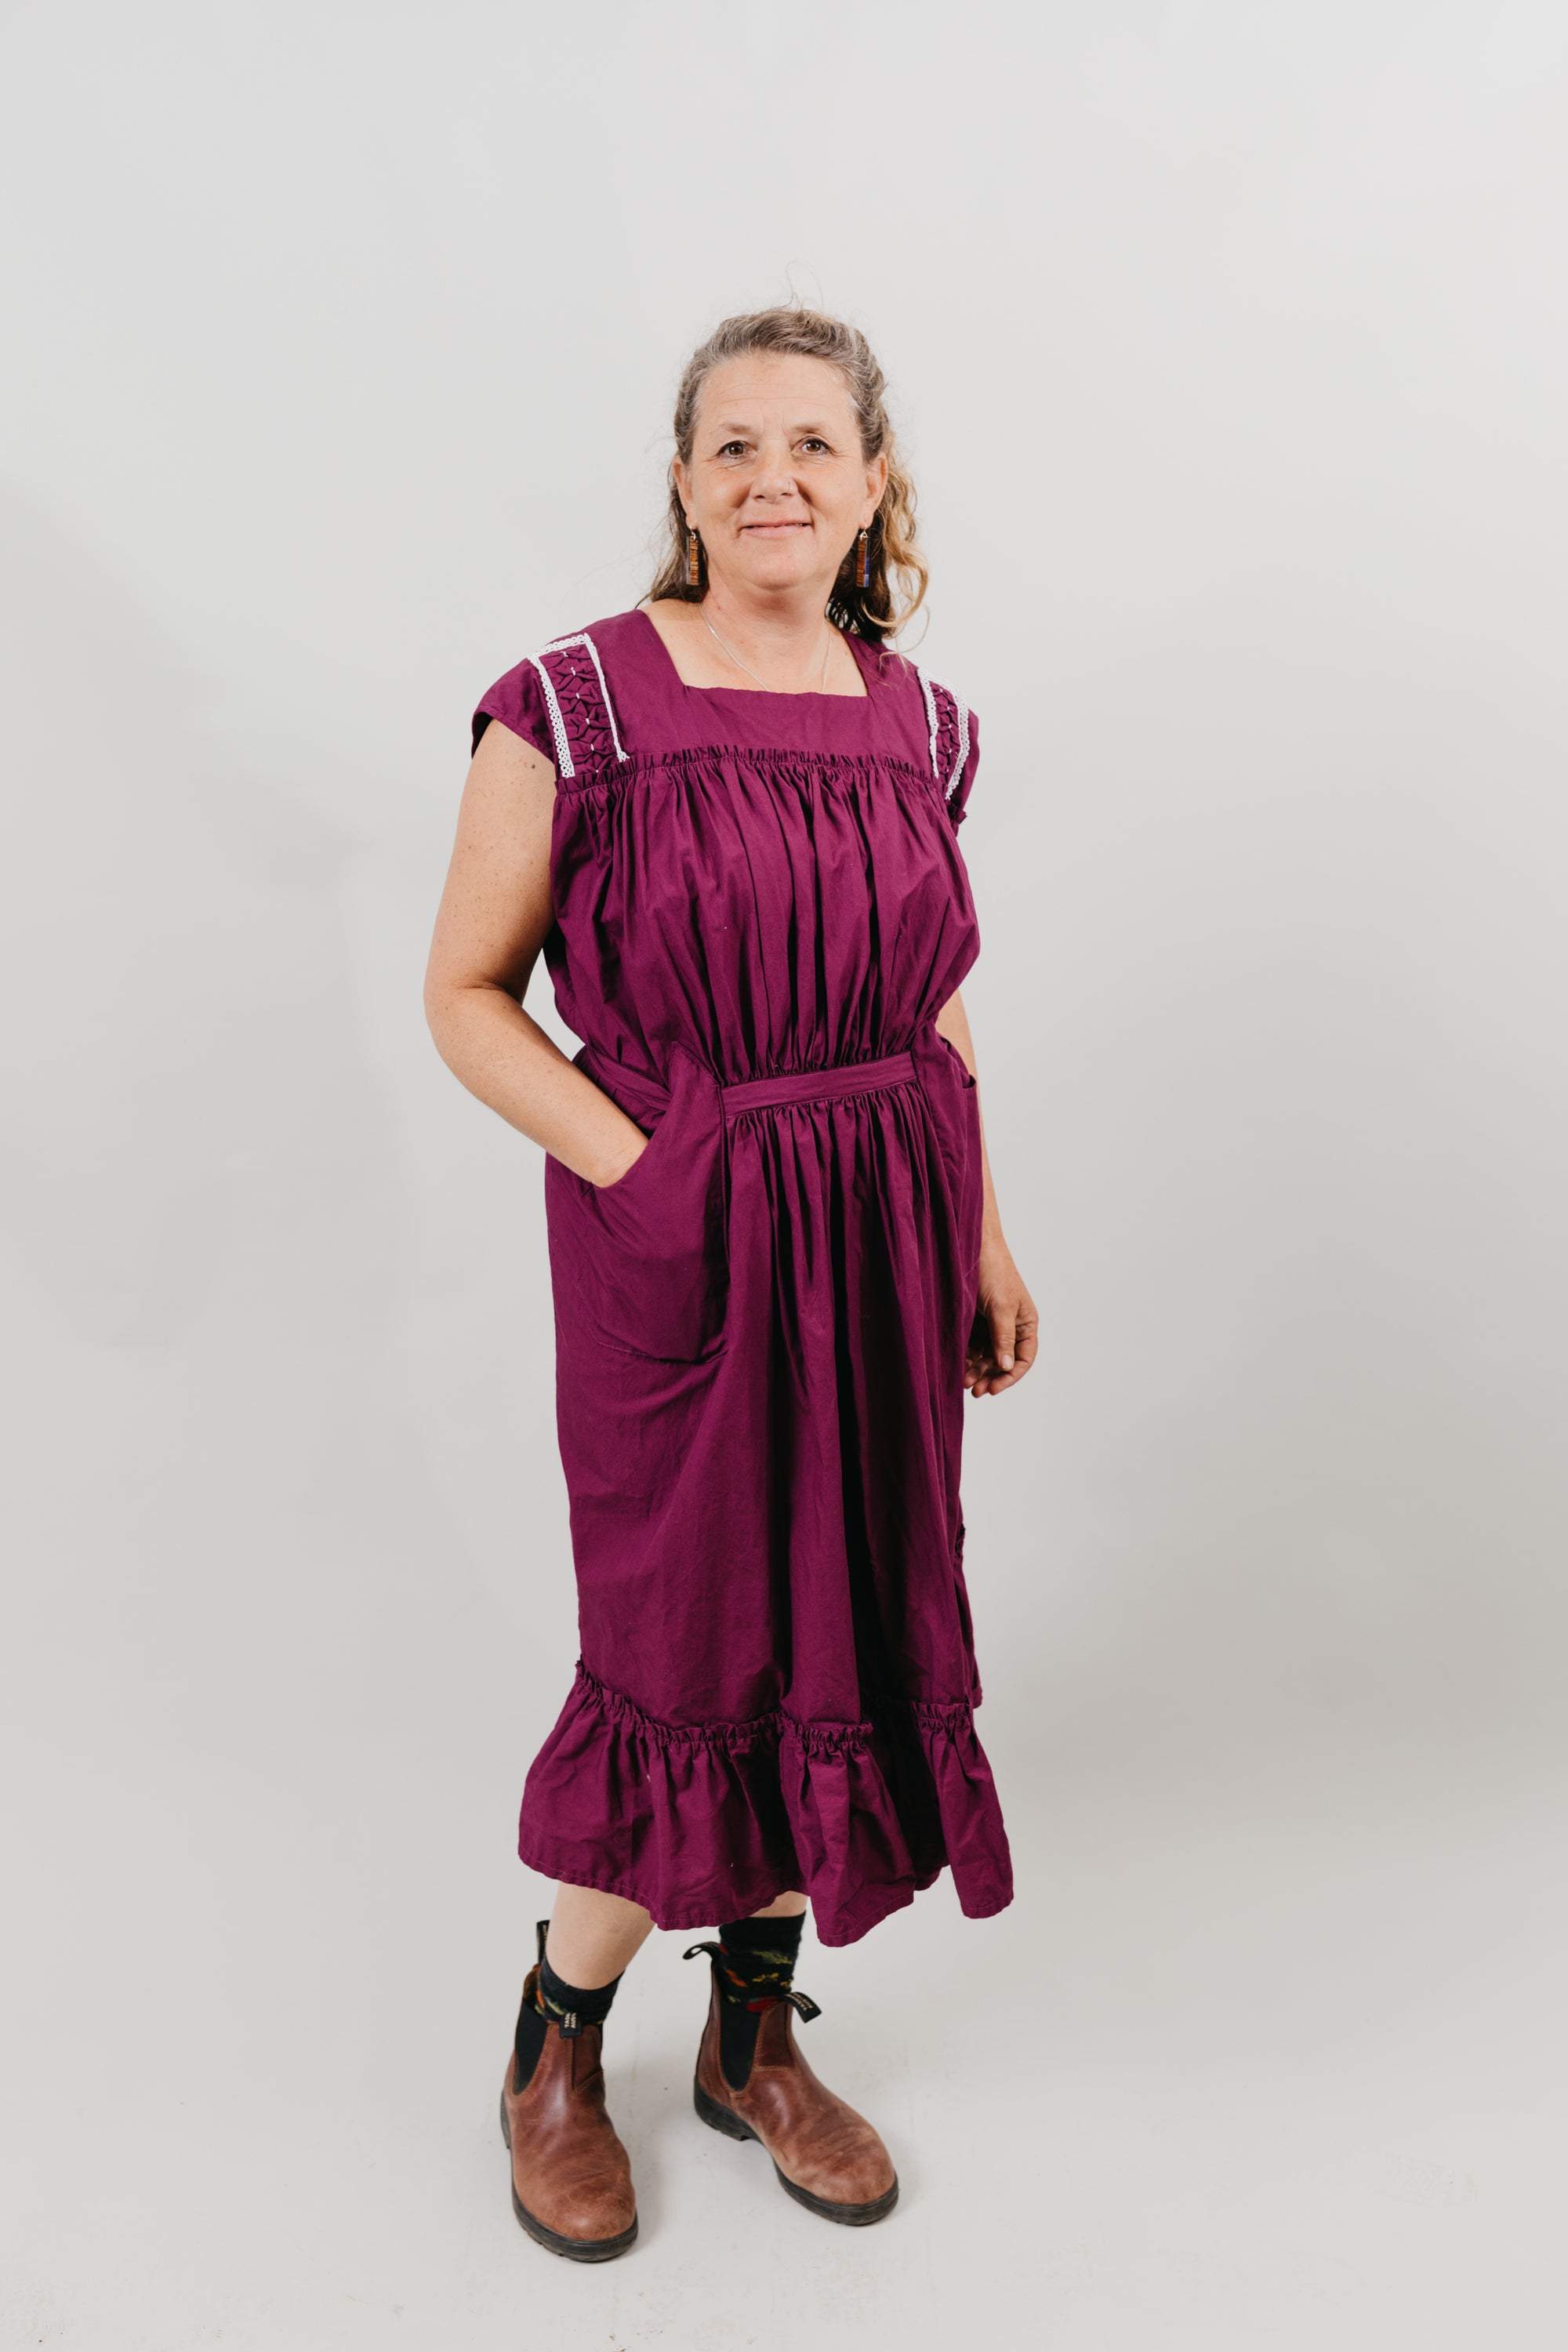 White woman wearing a purple sleeveless dress with embroidery at the shoulder yokes.  Standing in front of a white background.  Dress has pockets and is belted at the waist and has a flounce at the bottom.